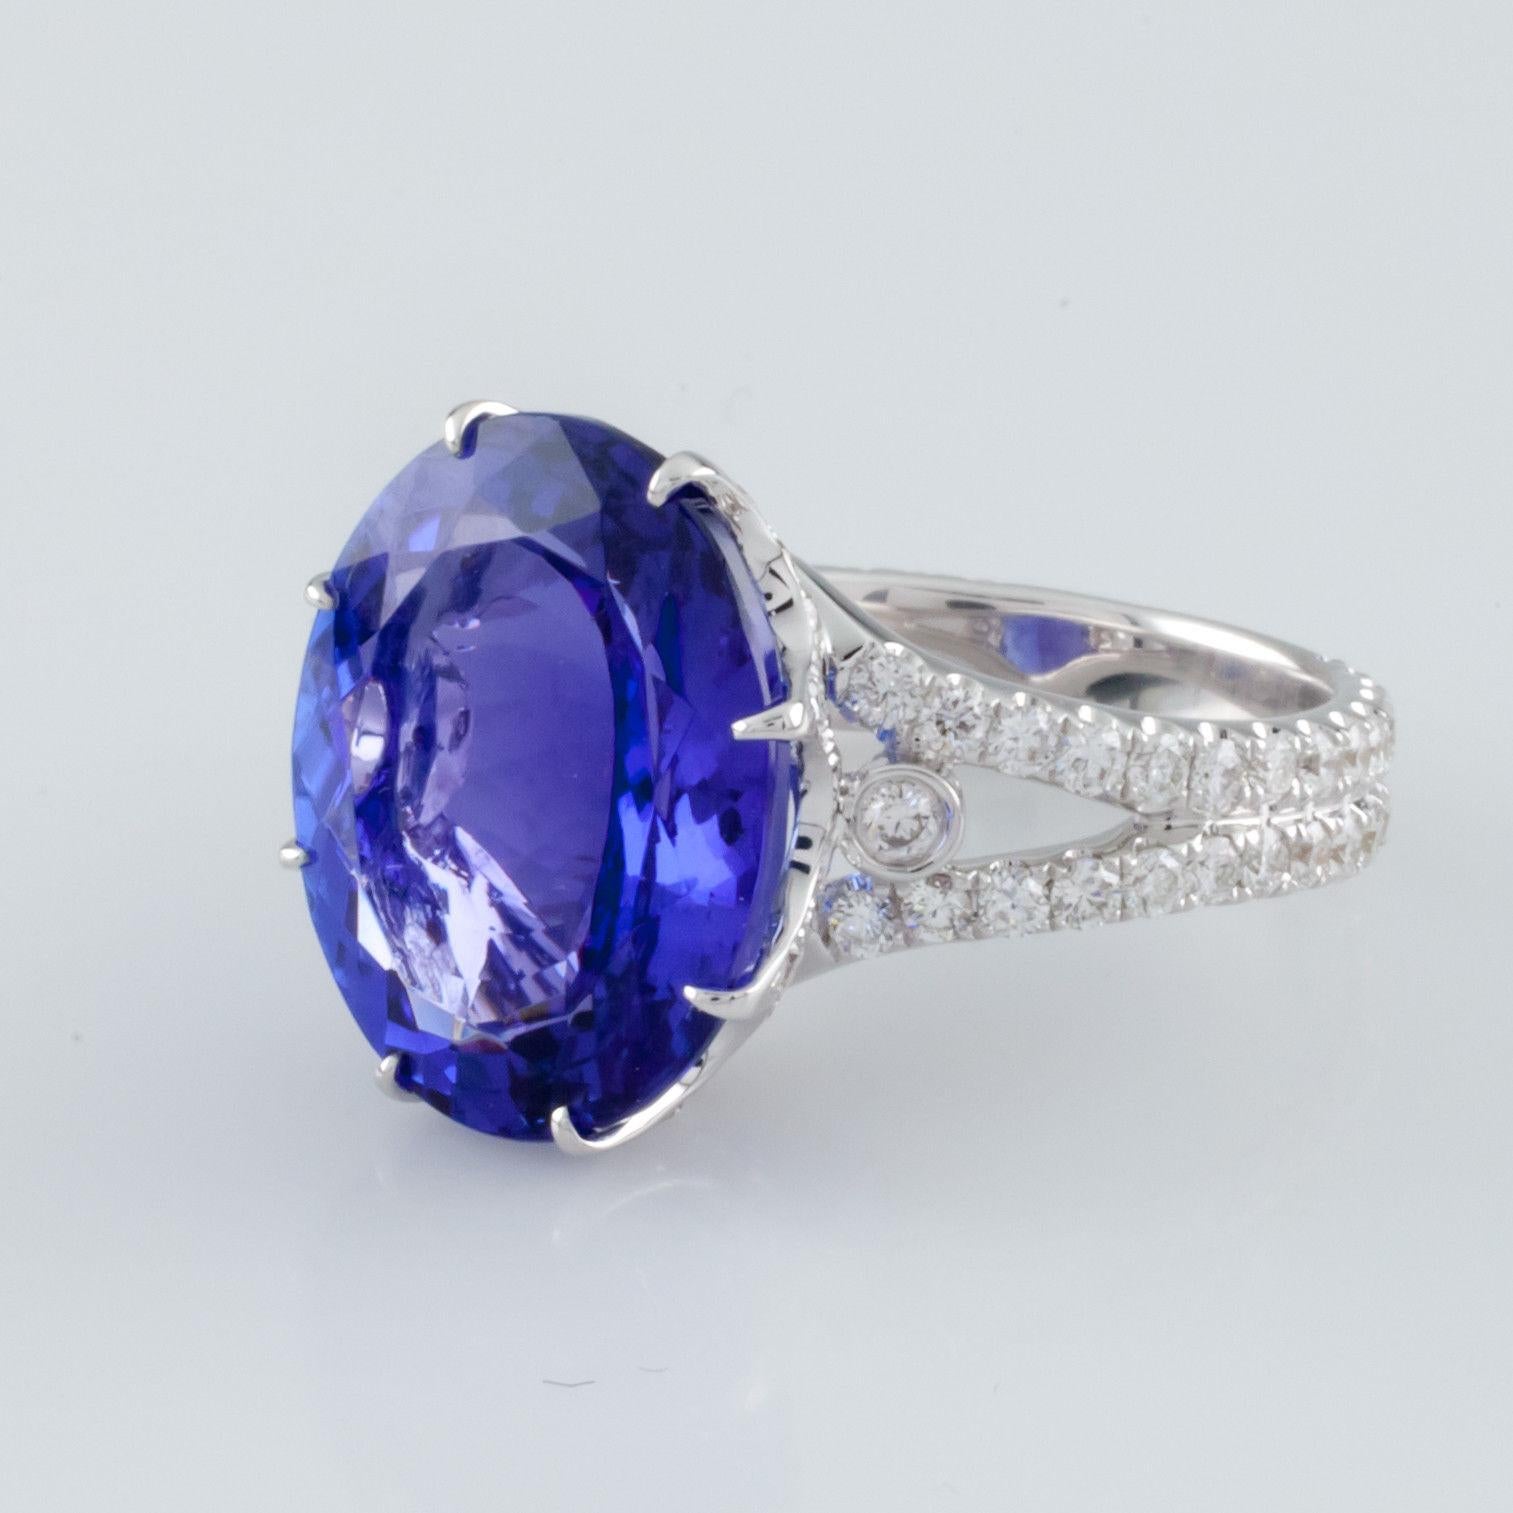 Gorgeous 18k White Gold Tanzanite Solitaire Ring
Features Diamond-Studded Prong and Double Band
Size 6.5
Includes Appraisal, Which Reads:
Diamonds:
Shape: Full cut
Quantity: 100, Mounted
Actual Weight = 1.43 carat
Average Clarity = VS2 - SI1
Average